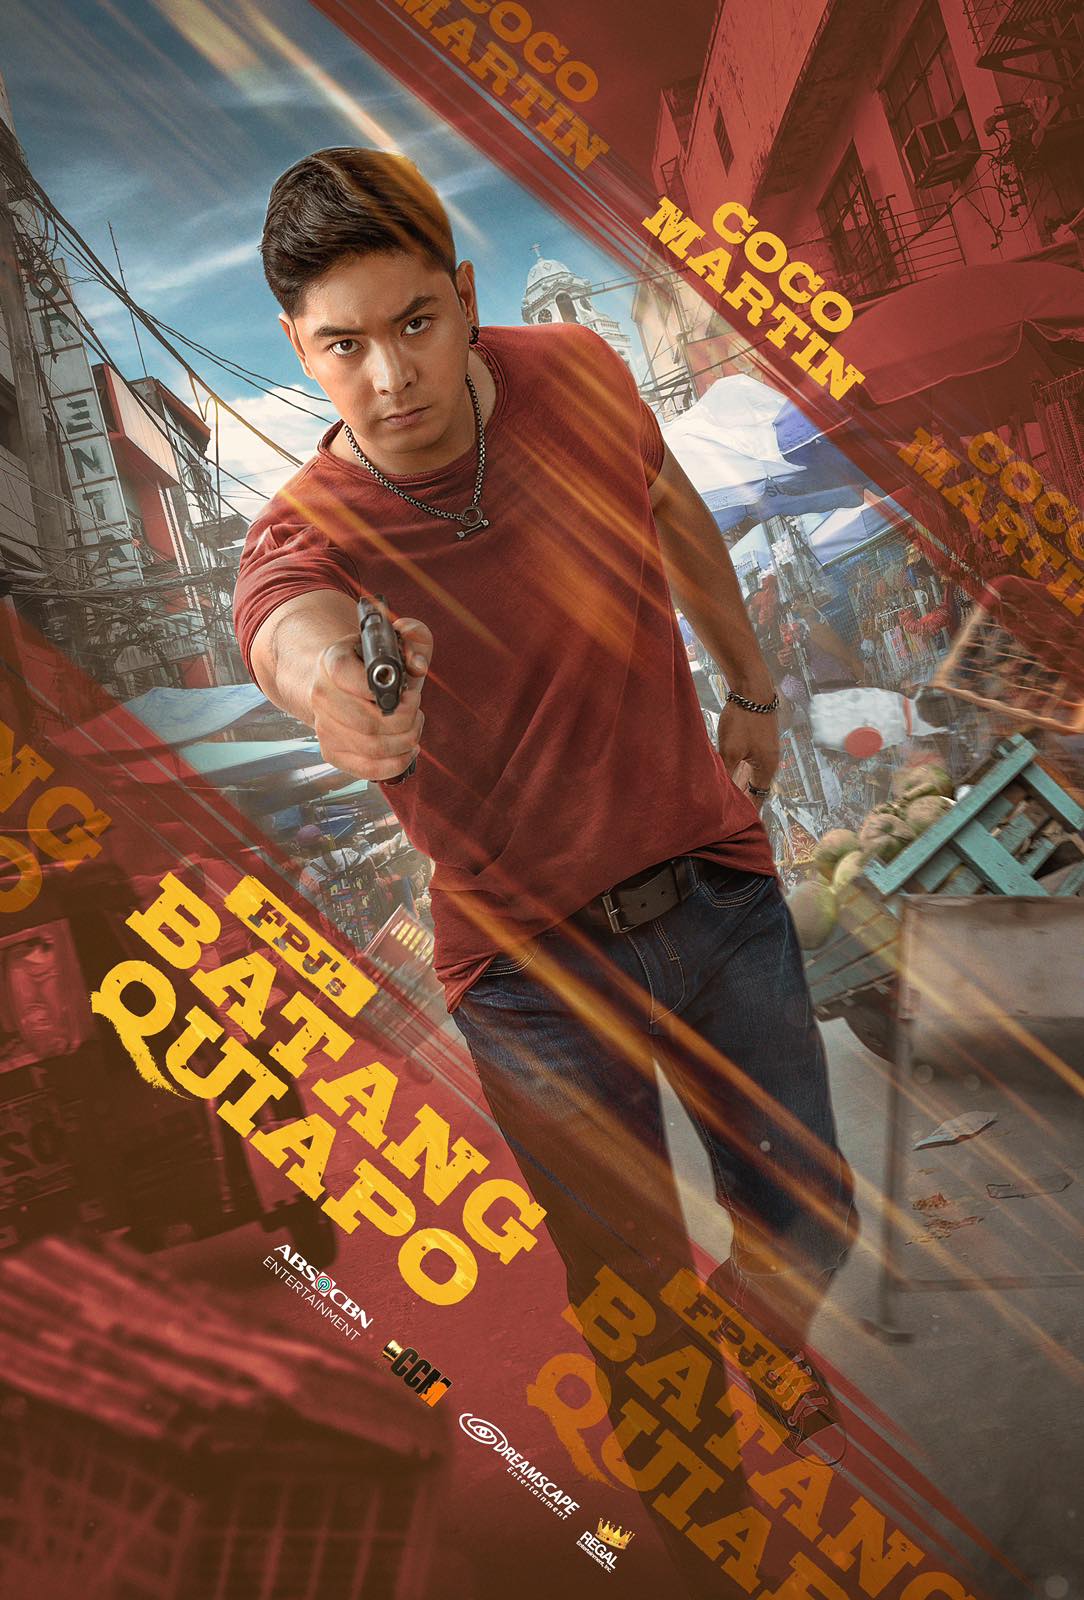 "FPJ's Batang Quiapo" pilot trends at 1, earns 341K live concurrent views